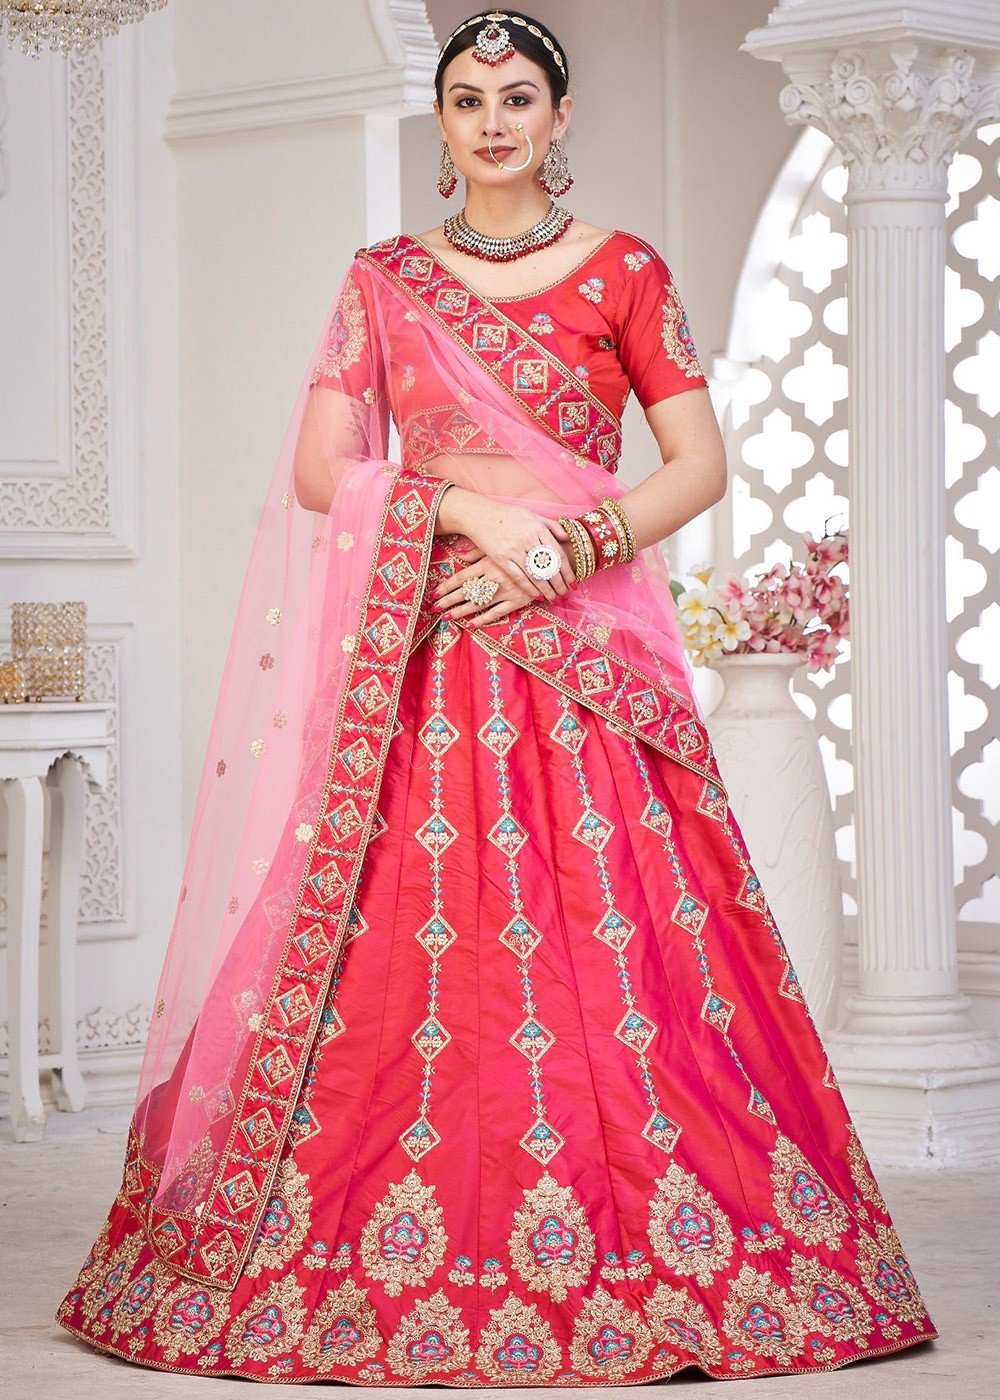 Stunning red and light pink ombre lehenga with cute pom pom bridal kaleere.  See more on wedmegood… | Indian bridal outfits, Indian bridal dress, Pink  bridal lehenga